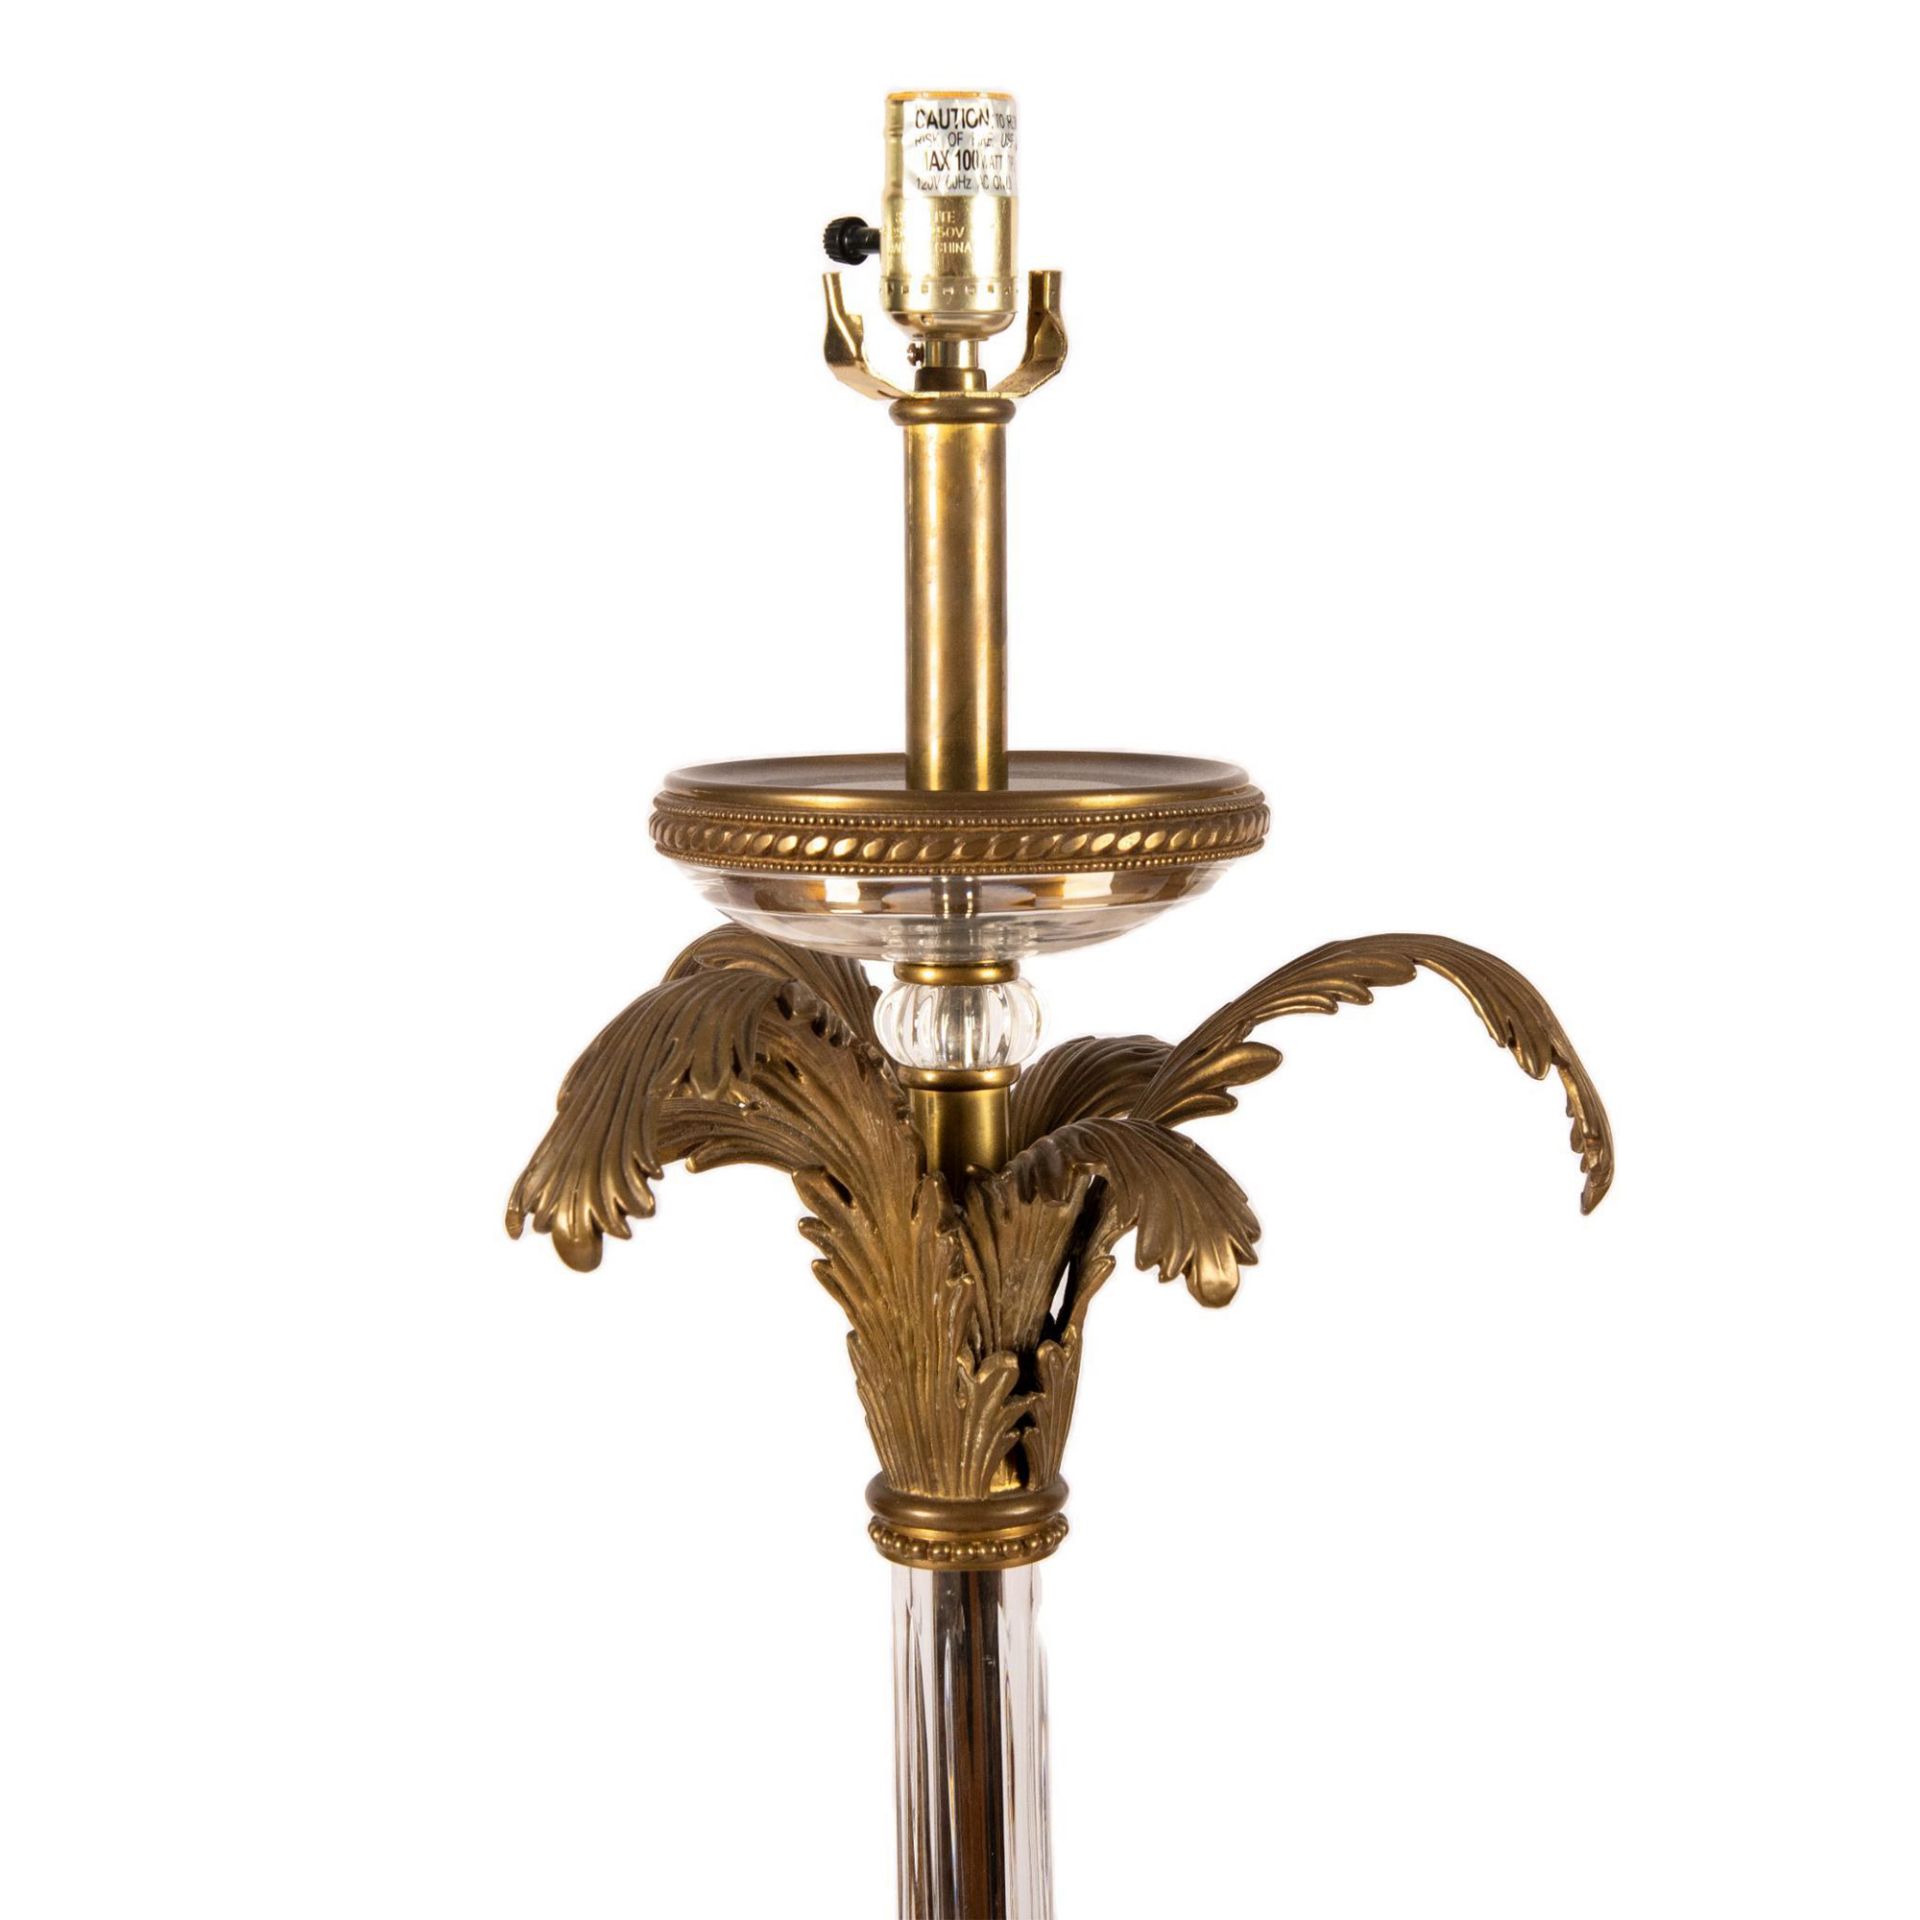 Baroque Style Brass and Glass Ornate Floor Lamp - Image 7 of 9